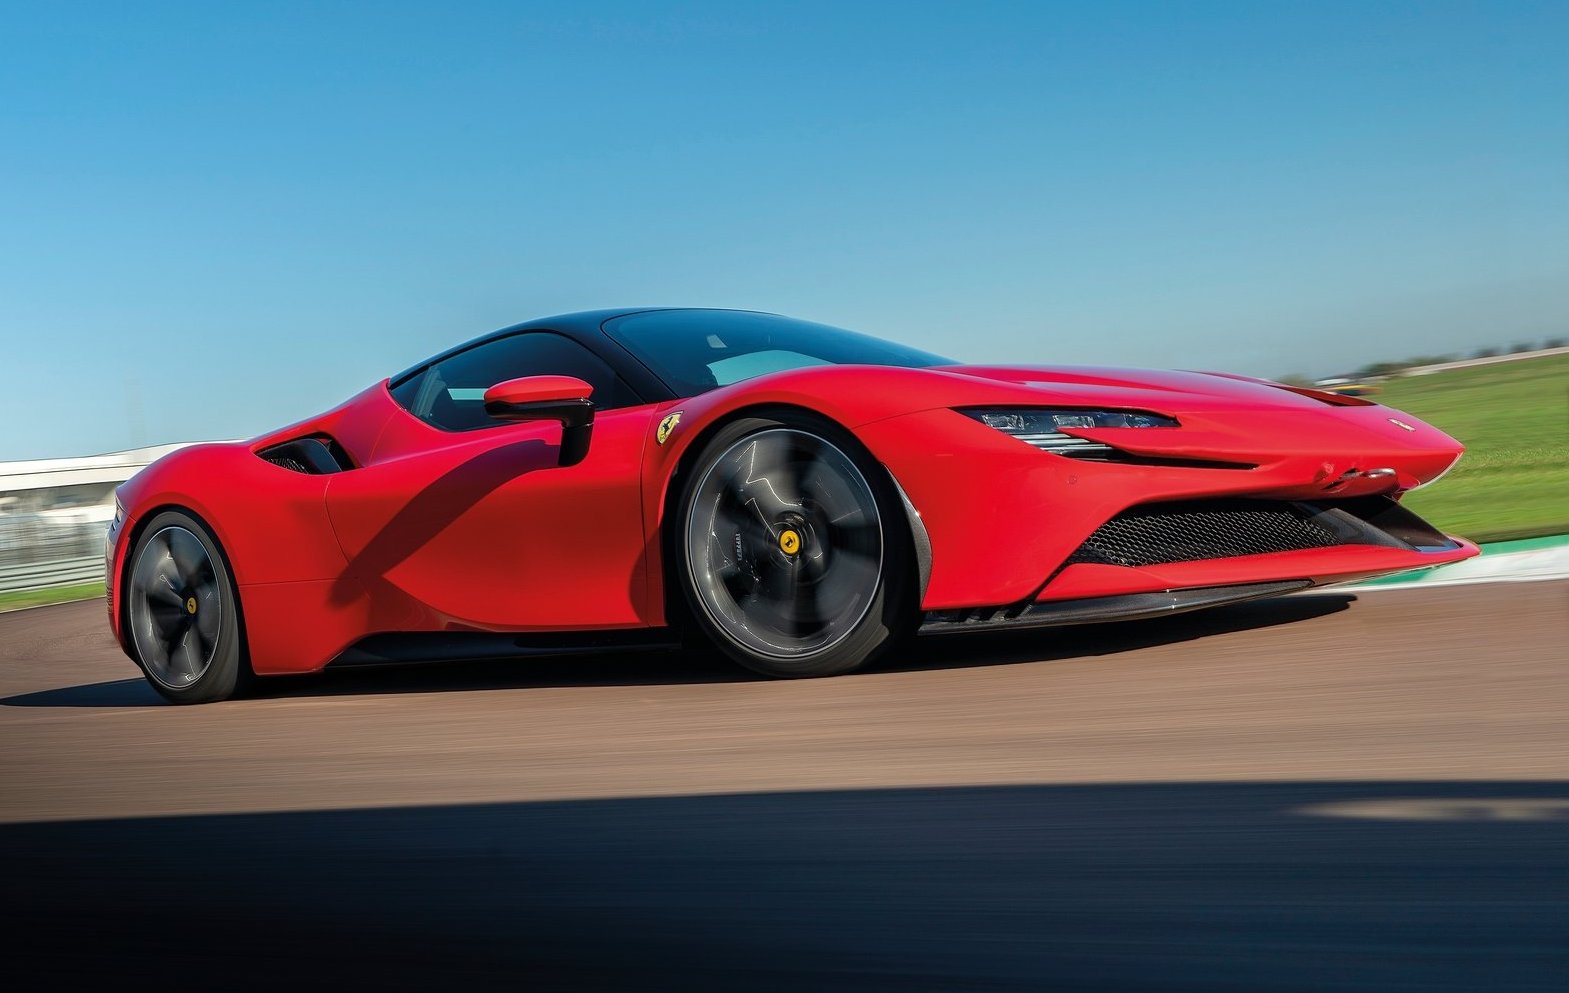 Ferrari boss excited electrification, first EV coming in 2025